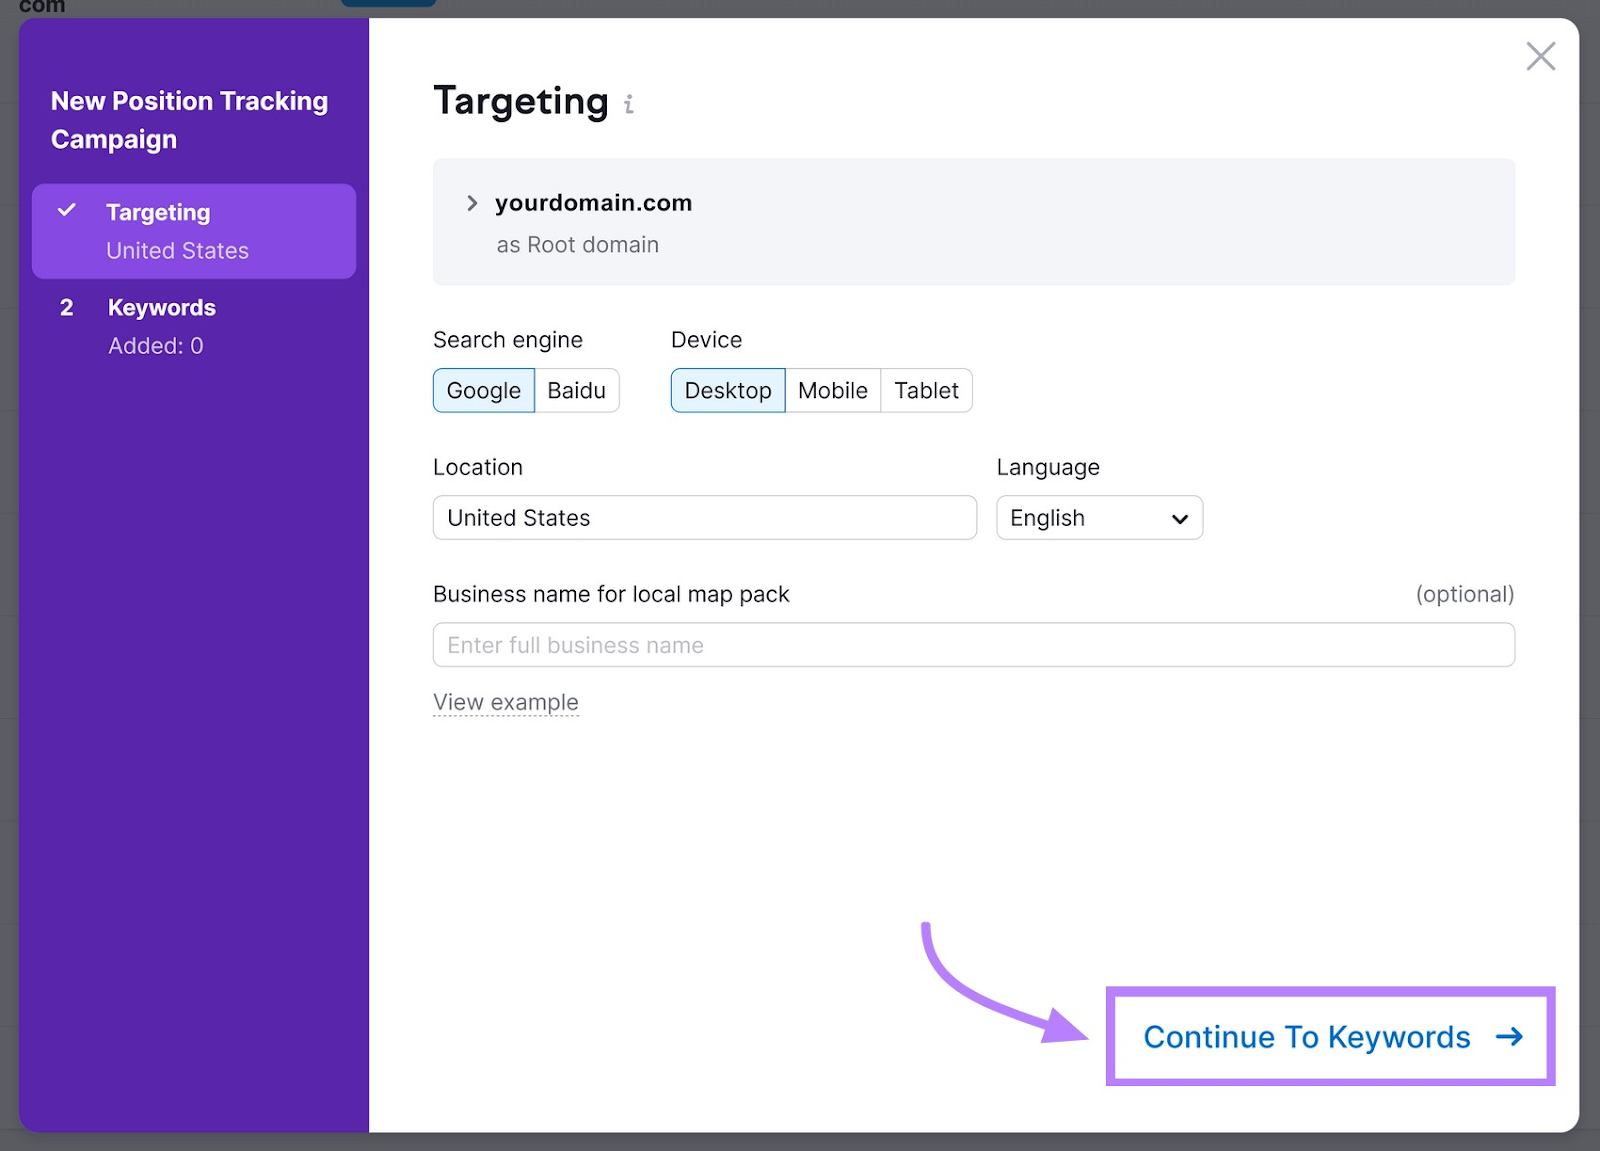 “Targeting” configuration page in Position Tracking tool